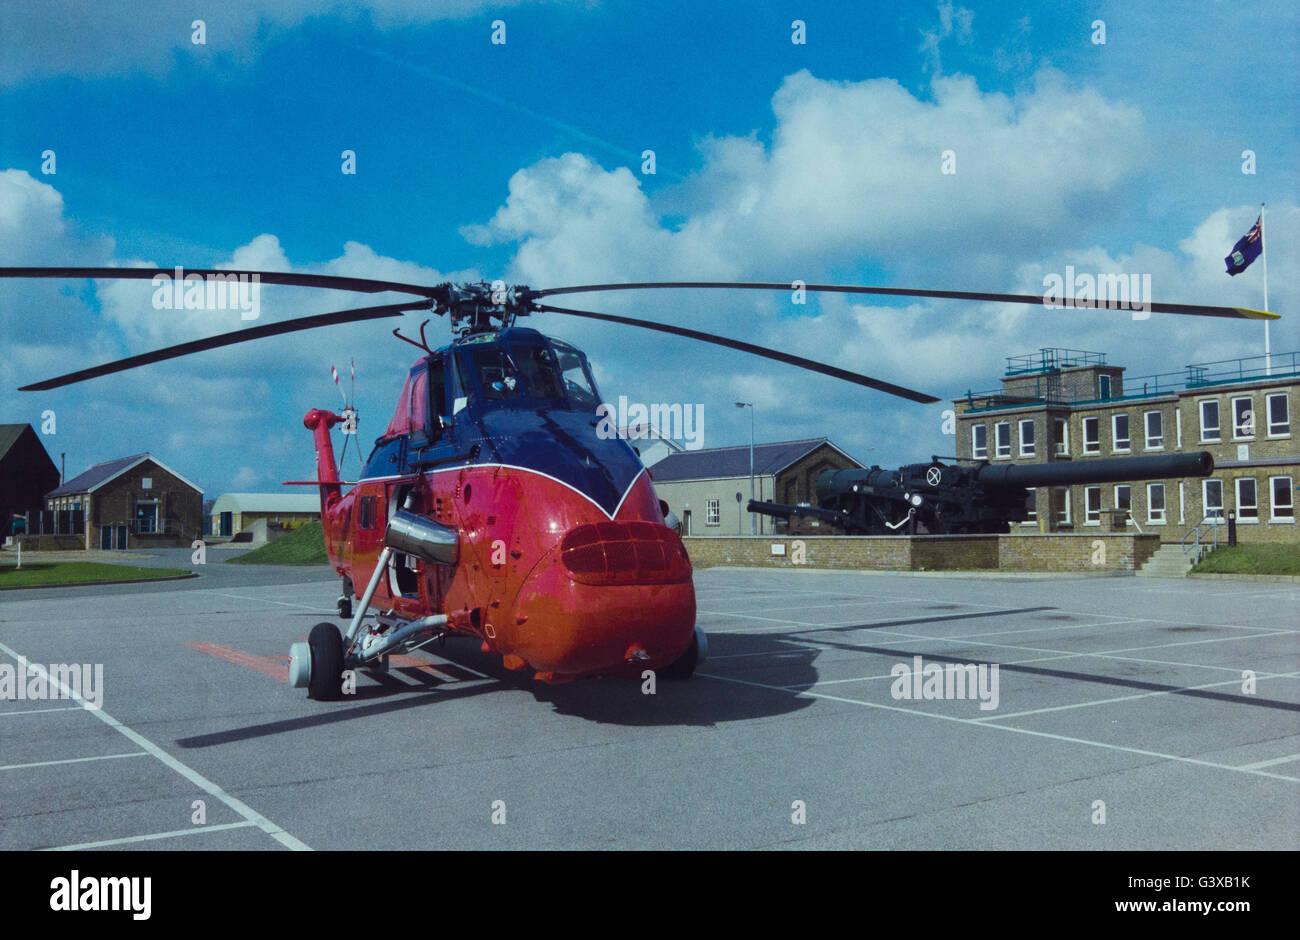 Archive image of Westland Wessex helicopter XV733 of the Queen's Flight, circa 1990, aircraft retired in 1995 now at the Helicopter Museum, Weston-Super-Mare, England. BL 18 inch railway howitzer, 1920, on proofing carriage also shown, now at Royal Armouries artillery museum, Fort Nelson, Hampshire.artillery gun great War Stock Photo